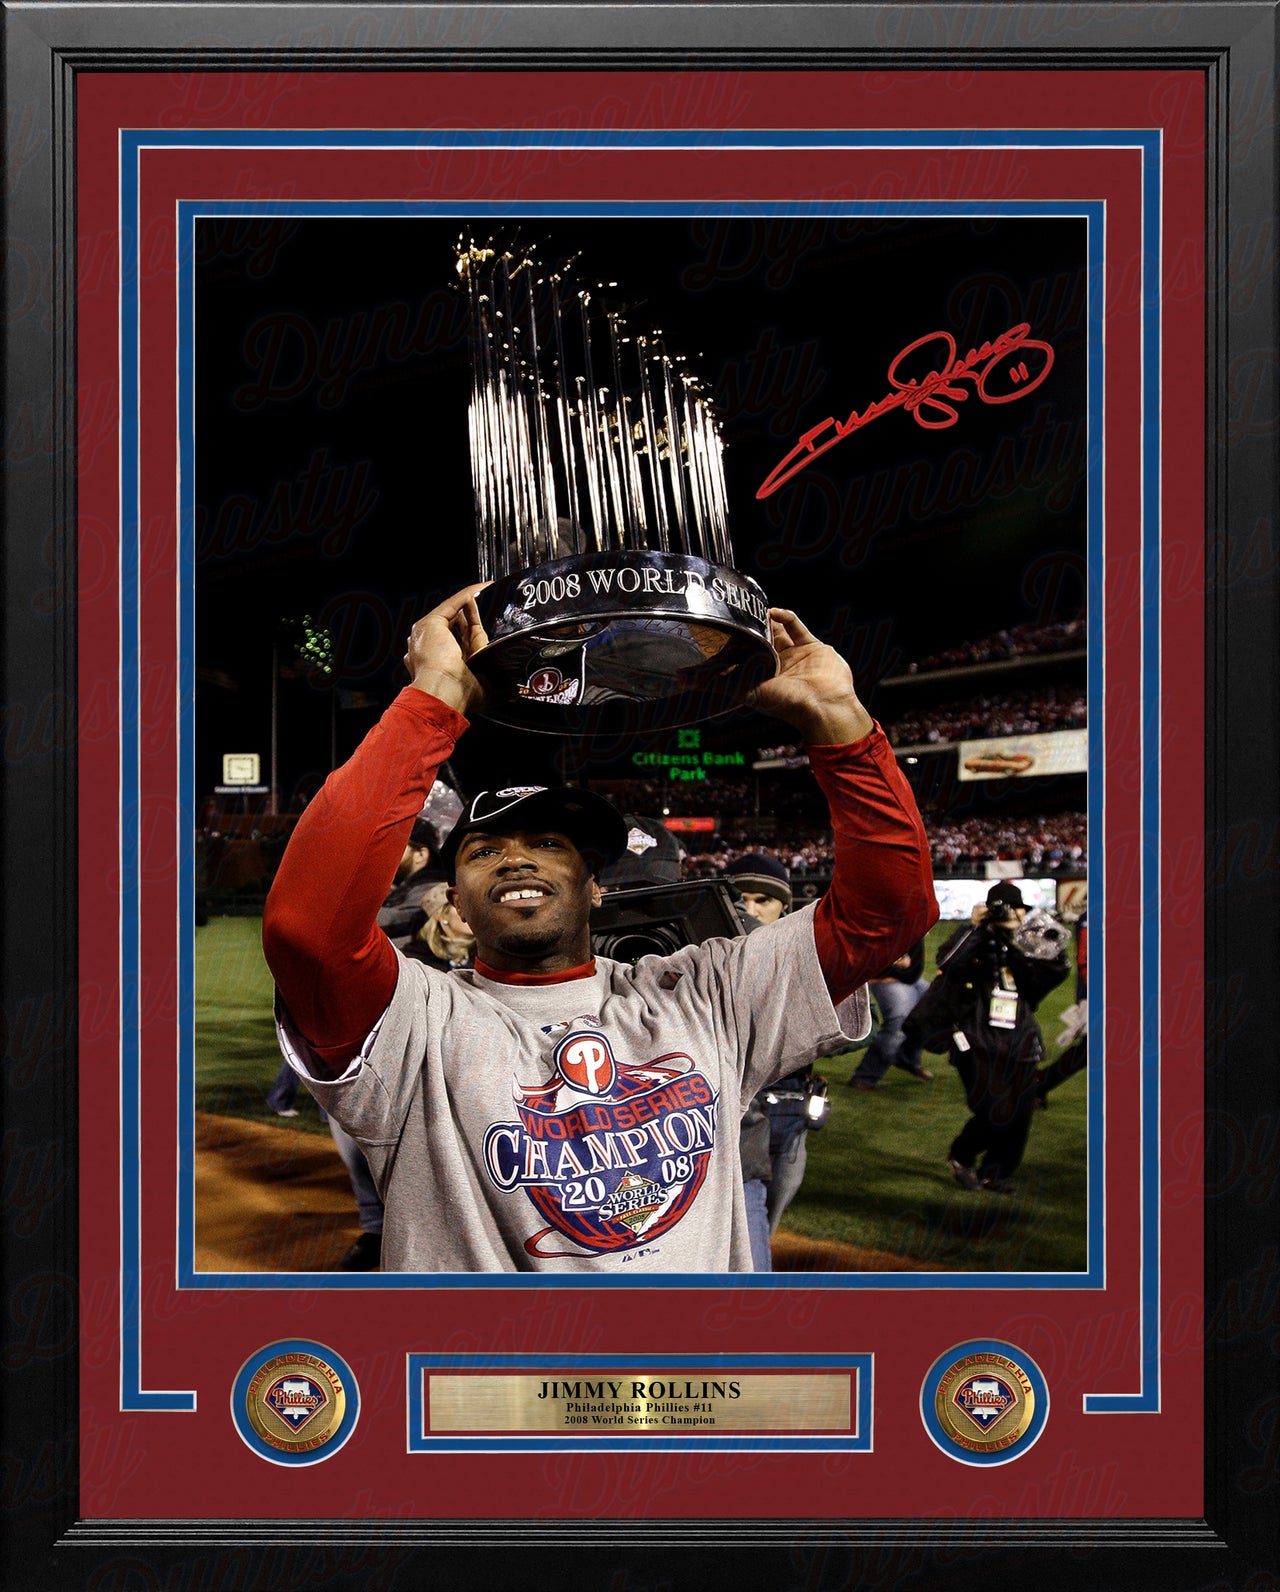 Jimmy Rollins Autographed 2008 World Series Trophy Framed Baseball Photo - Dynasty Sports & Framing 